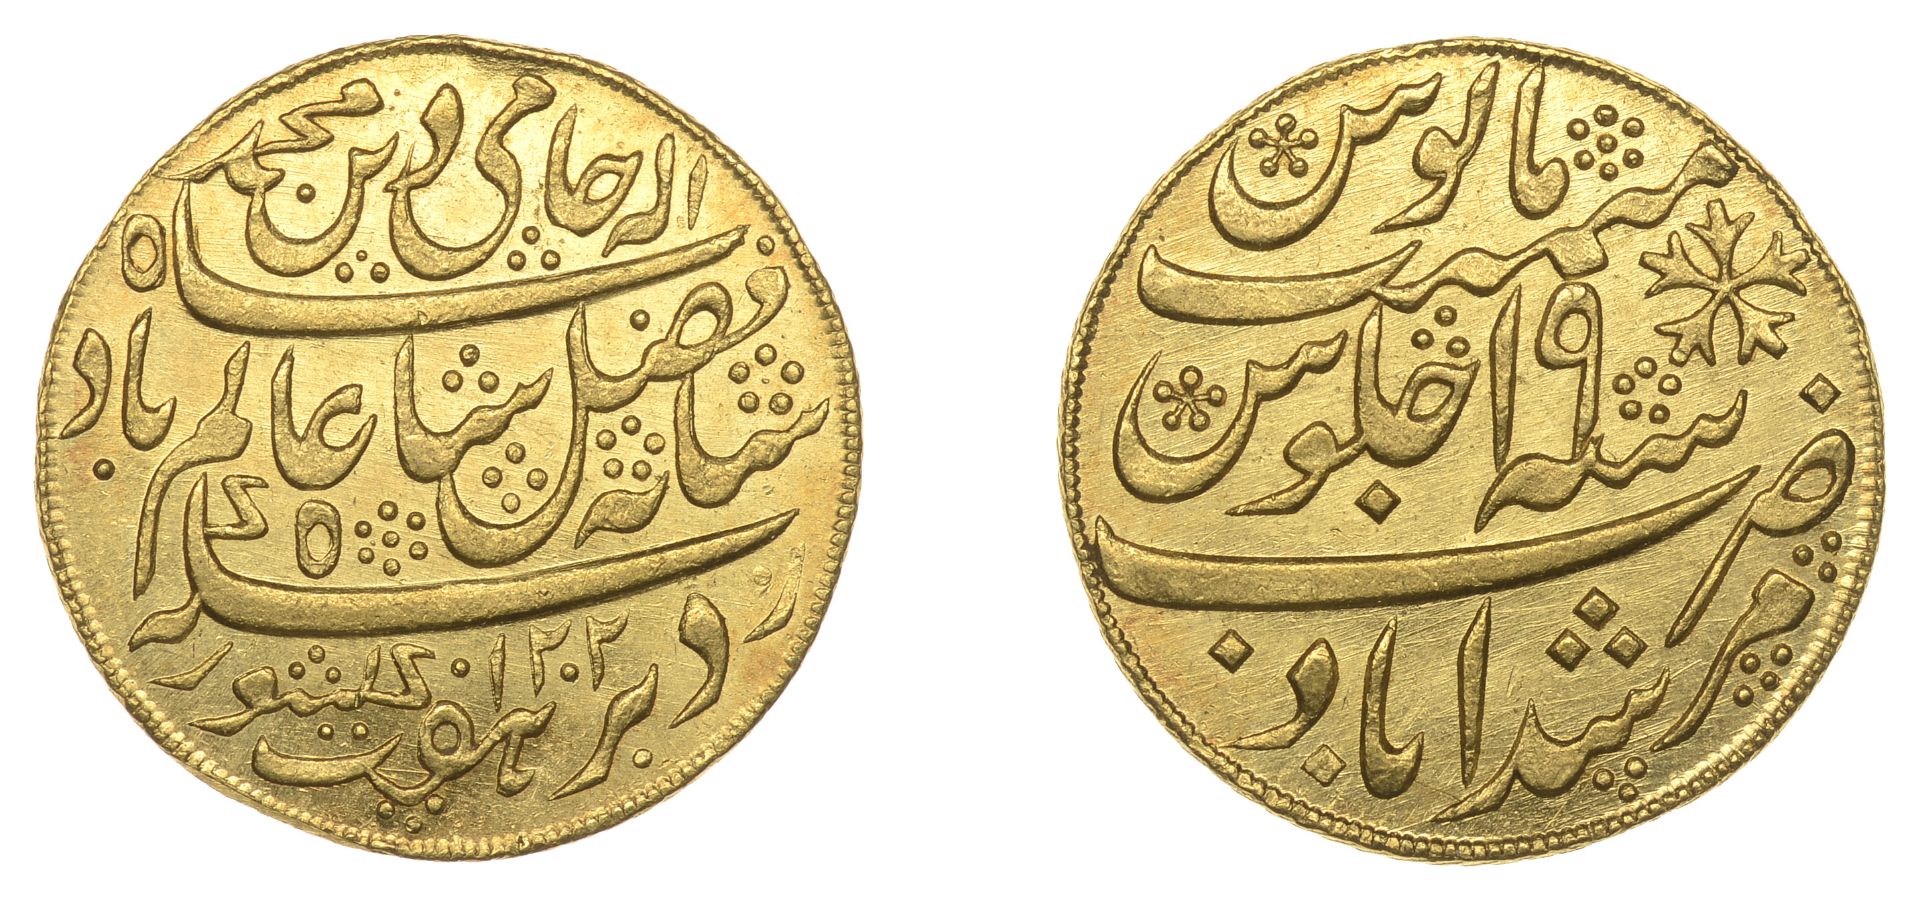 East India Company, Bengal Presidency, Patna Mint: Second milled issue, gold Half-Mohur in t...